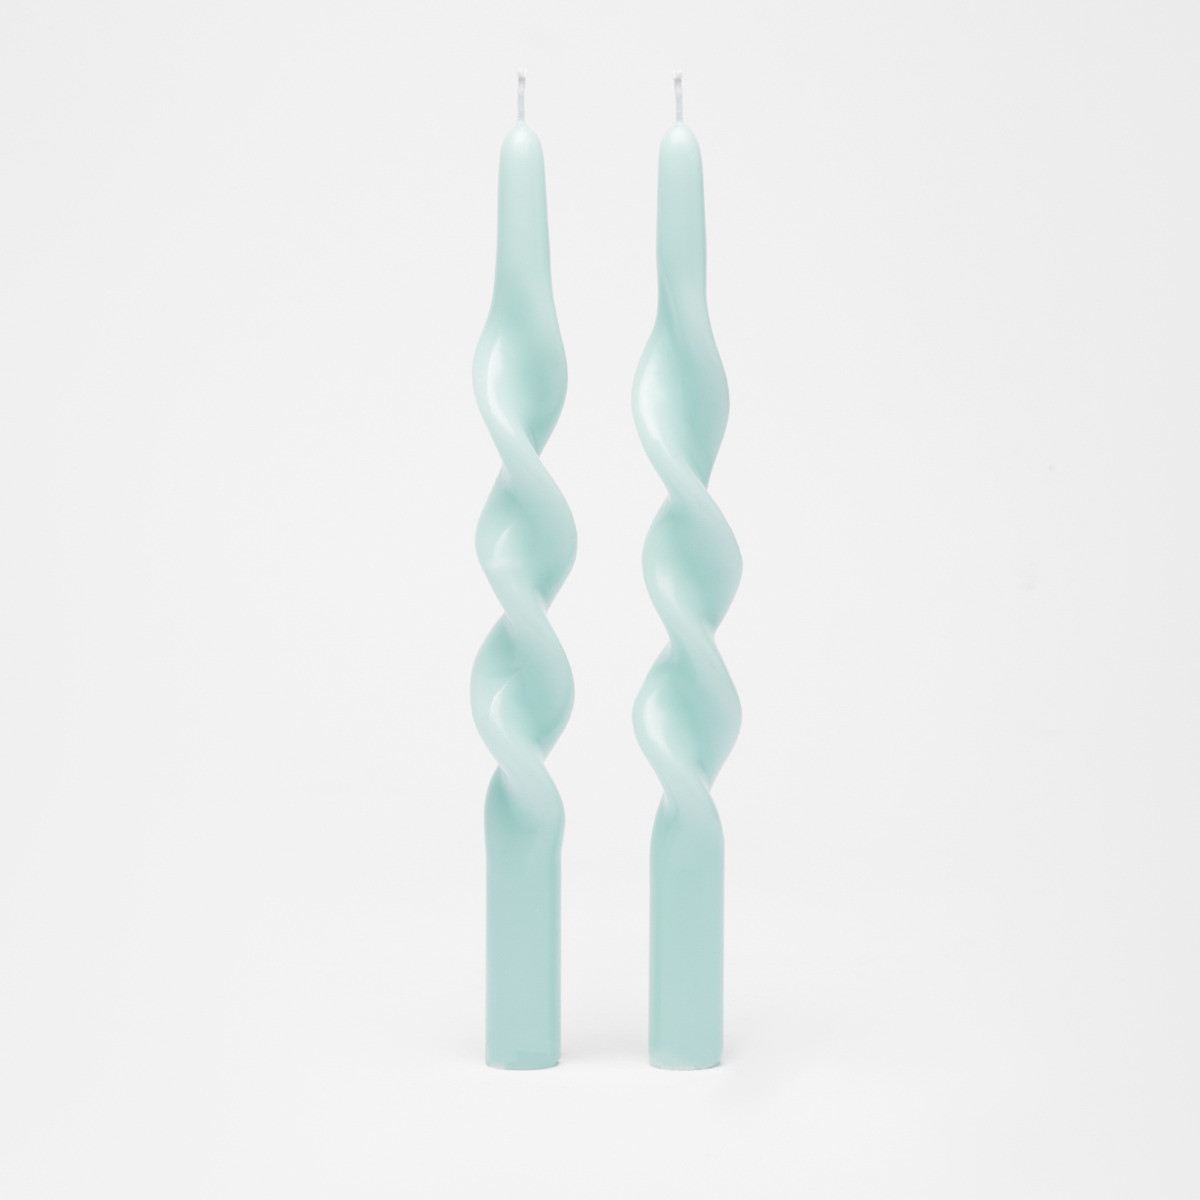 OHS Twisted Taper Candlestick, Pale Blue - Set of 2>